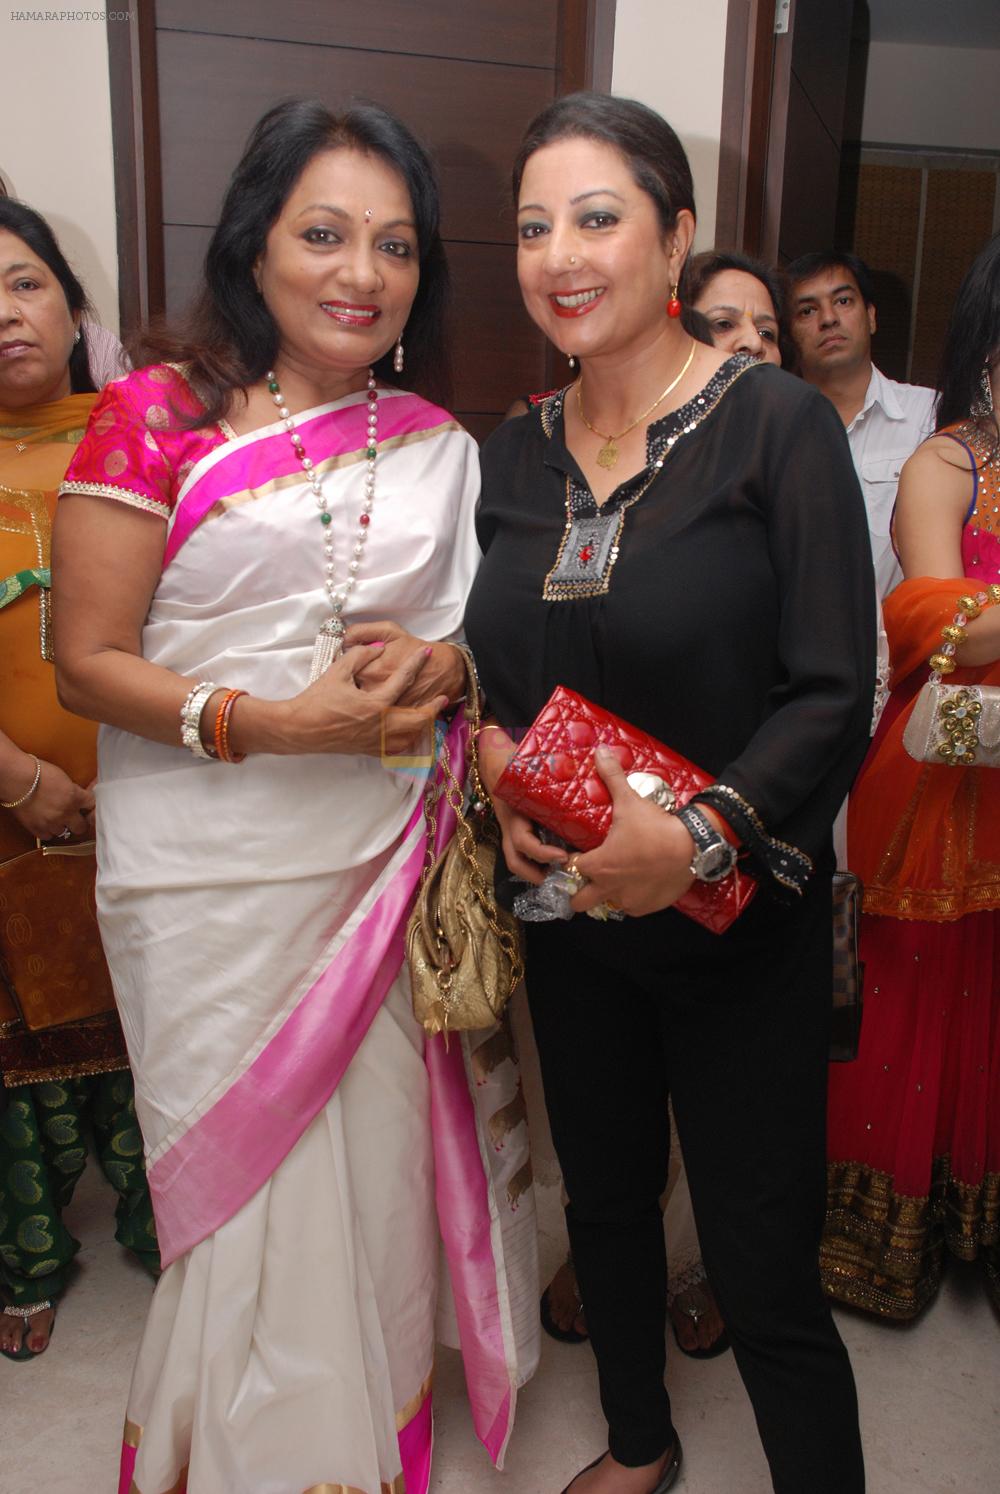 Rajlakshmi Rao with Neelam Pratap Rudy at SHAM-E-AWADH Celebrate this festive season in Awadhi Style in Vedic Spa Mantra on 26th Oct 2012